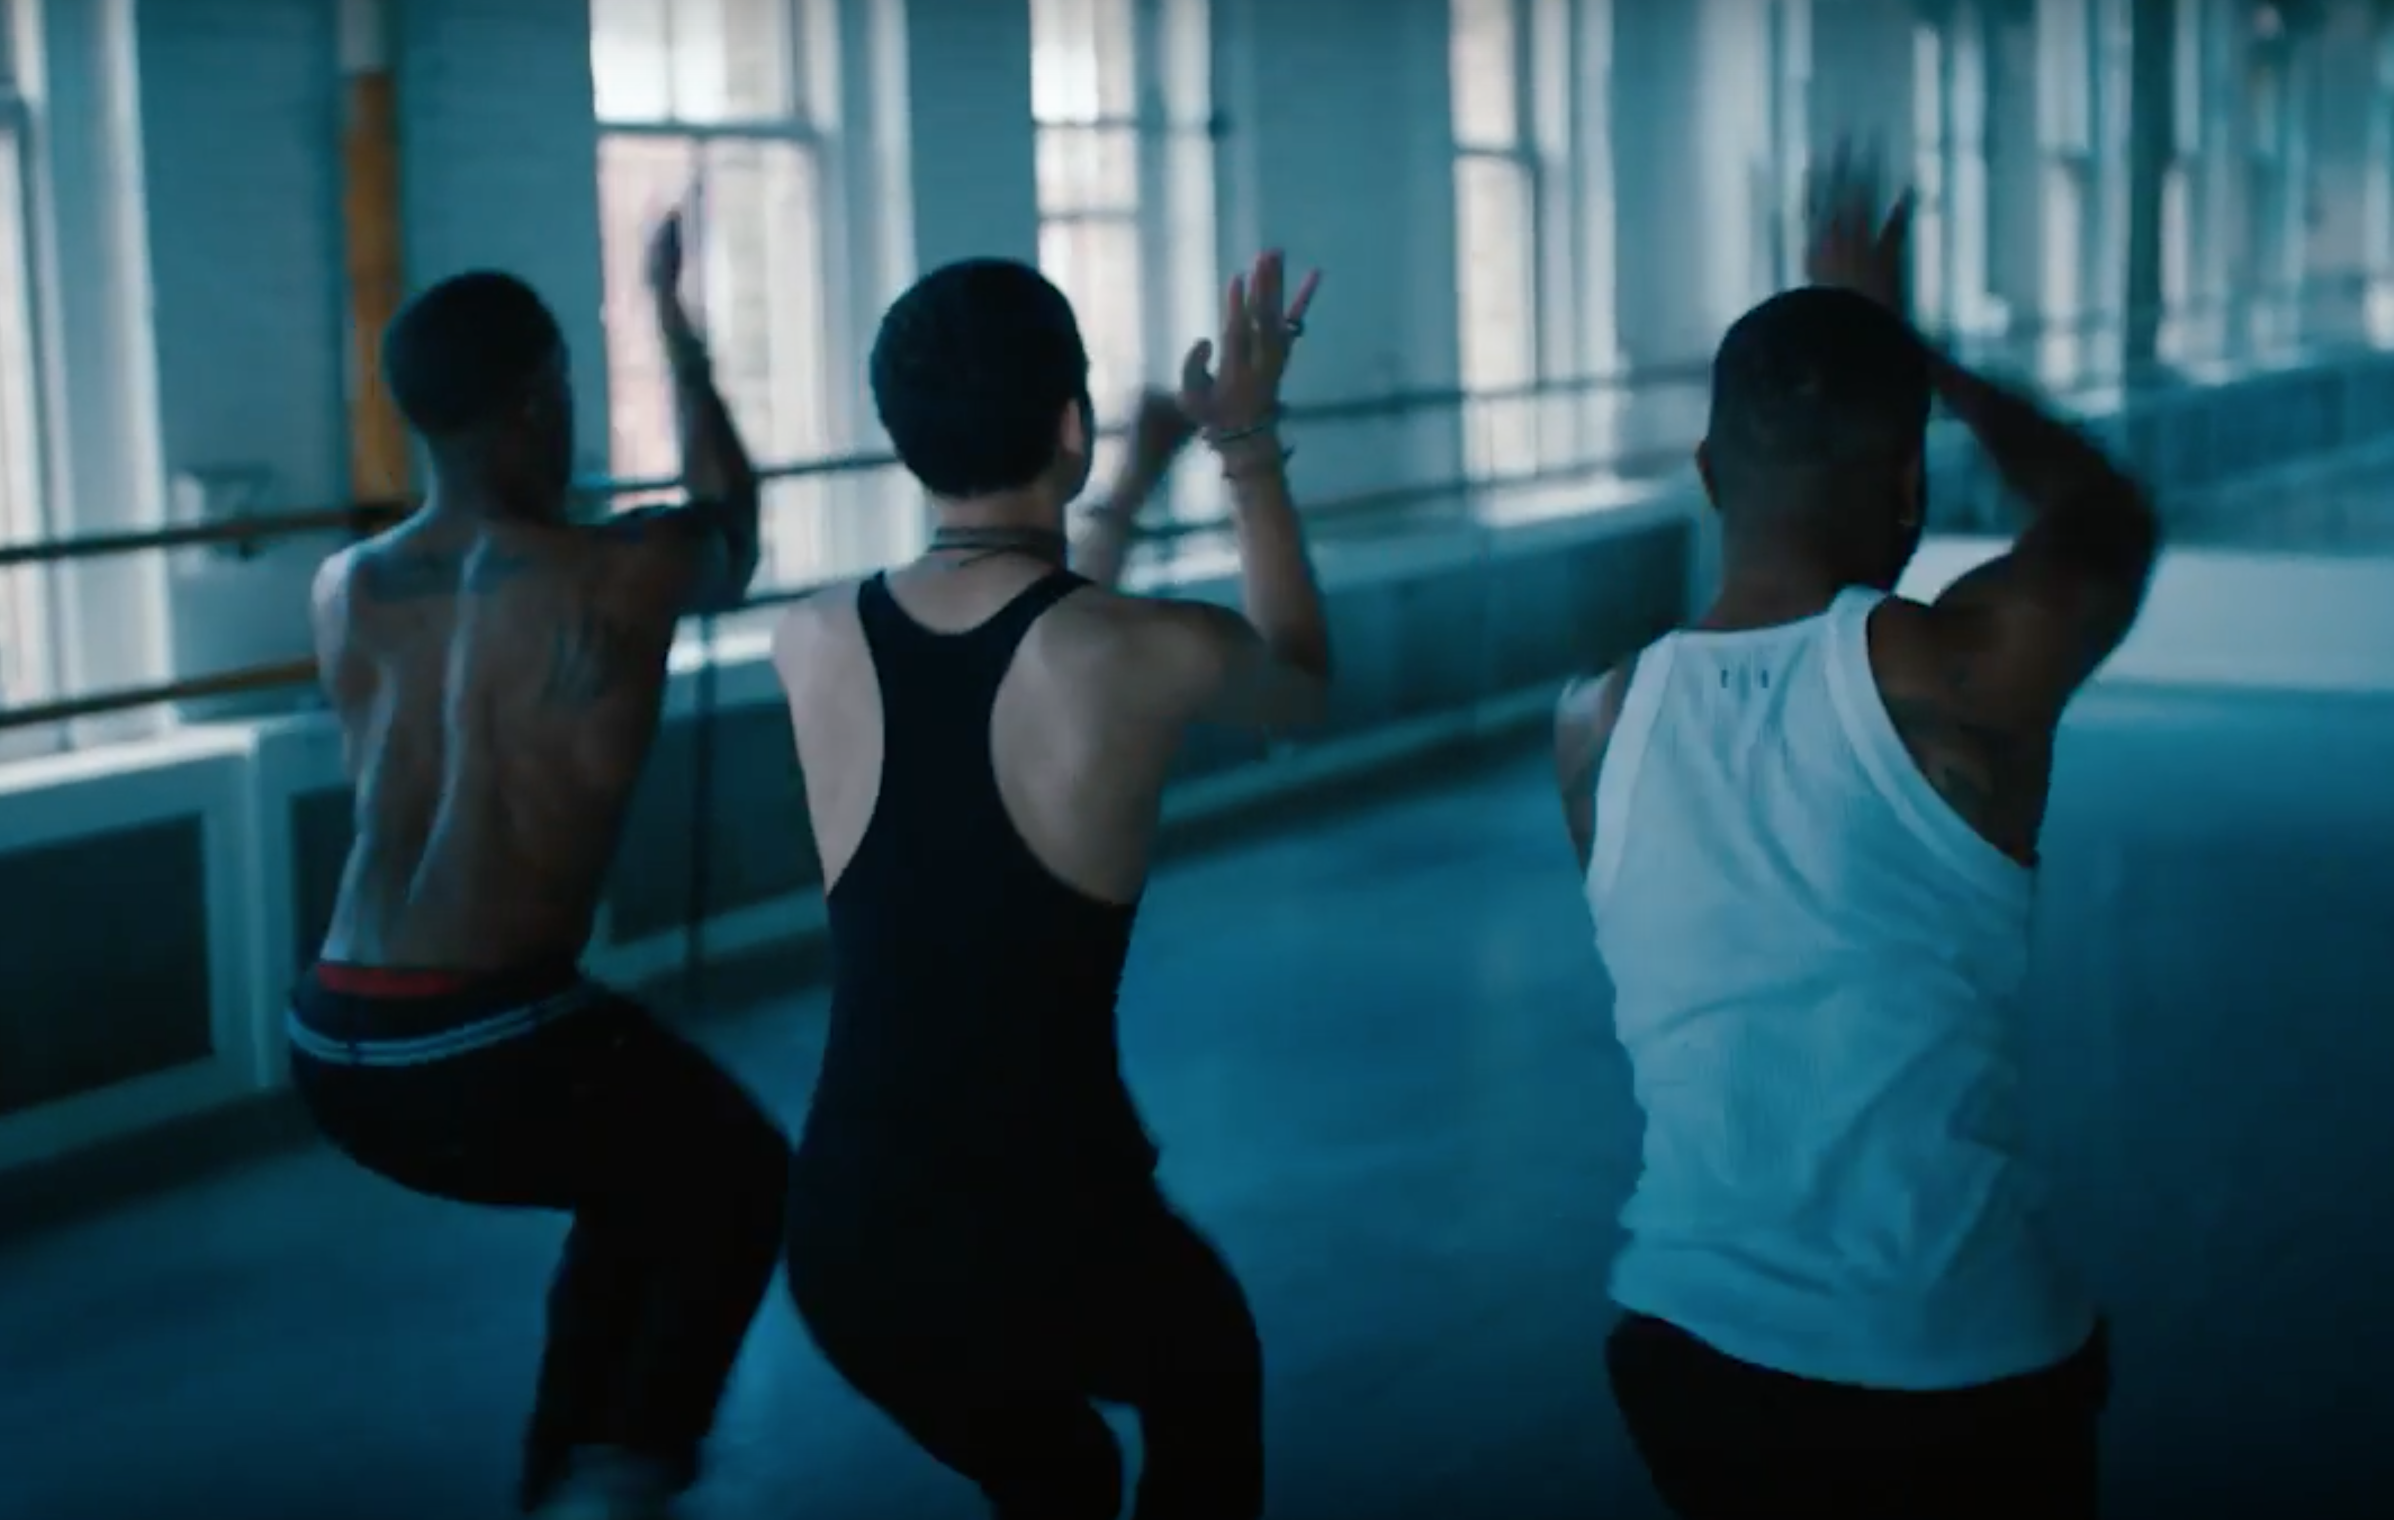 Nike’s new ad features transgender dancers voguing, proving there’s